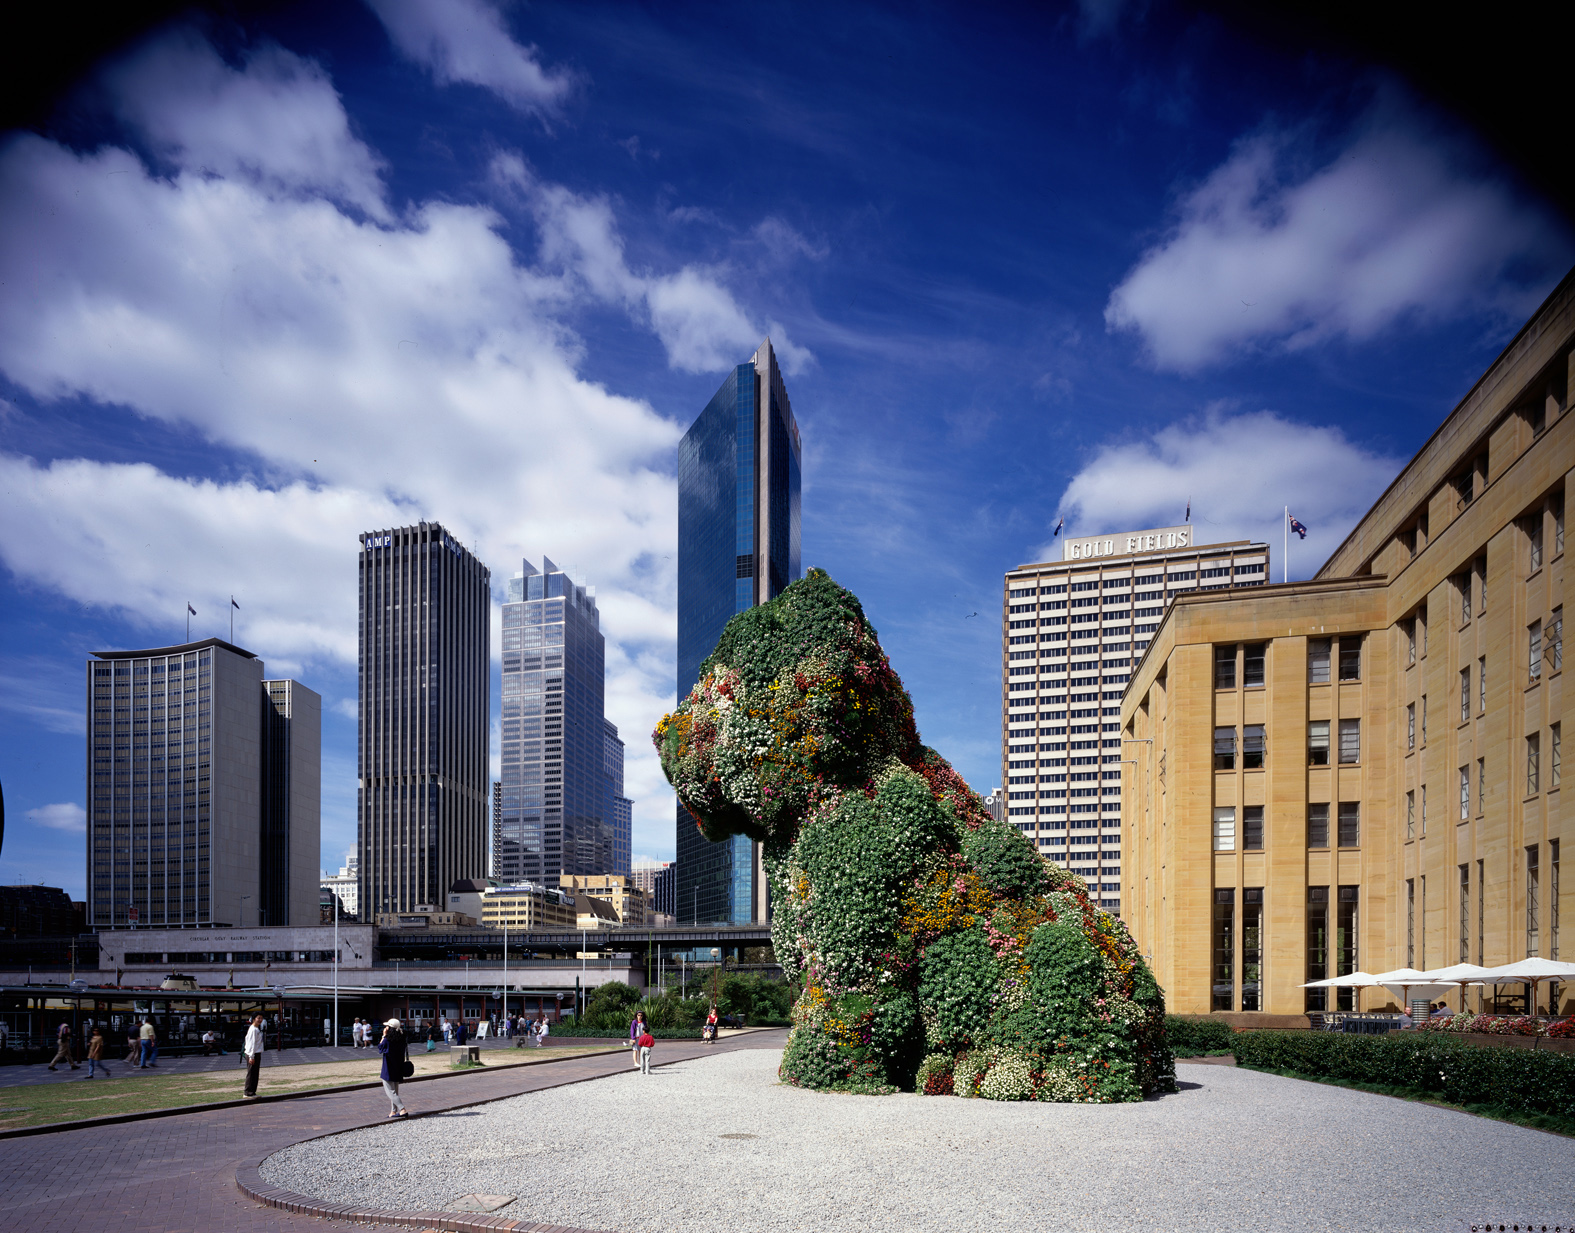 Kaldor Public Art Project 10: Jeff Koons "Puppy", Museum of Contemporary Art forecourt, Sydney, 12 December 1995 – 17 March 1996 © Jeff Koons. Photography: Eric Sierins
